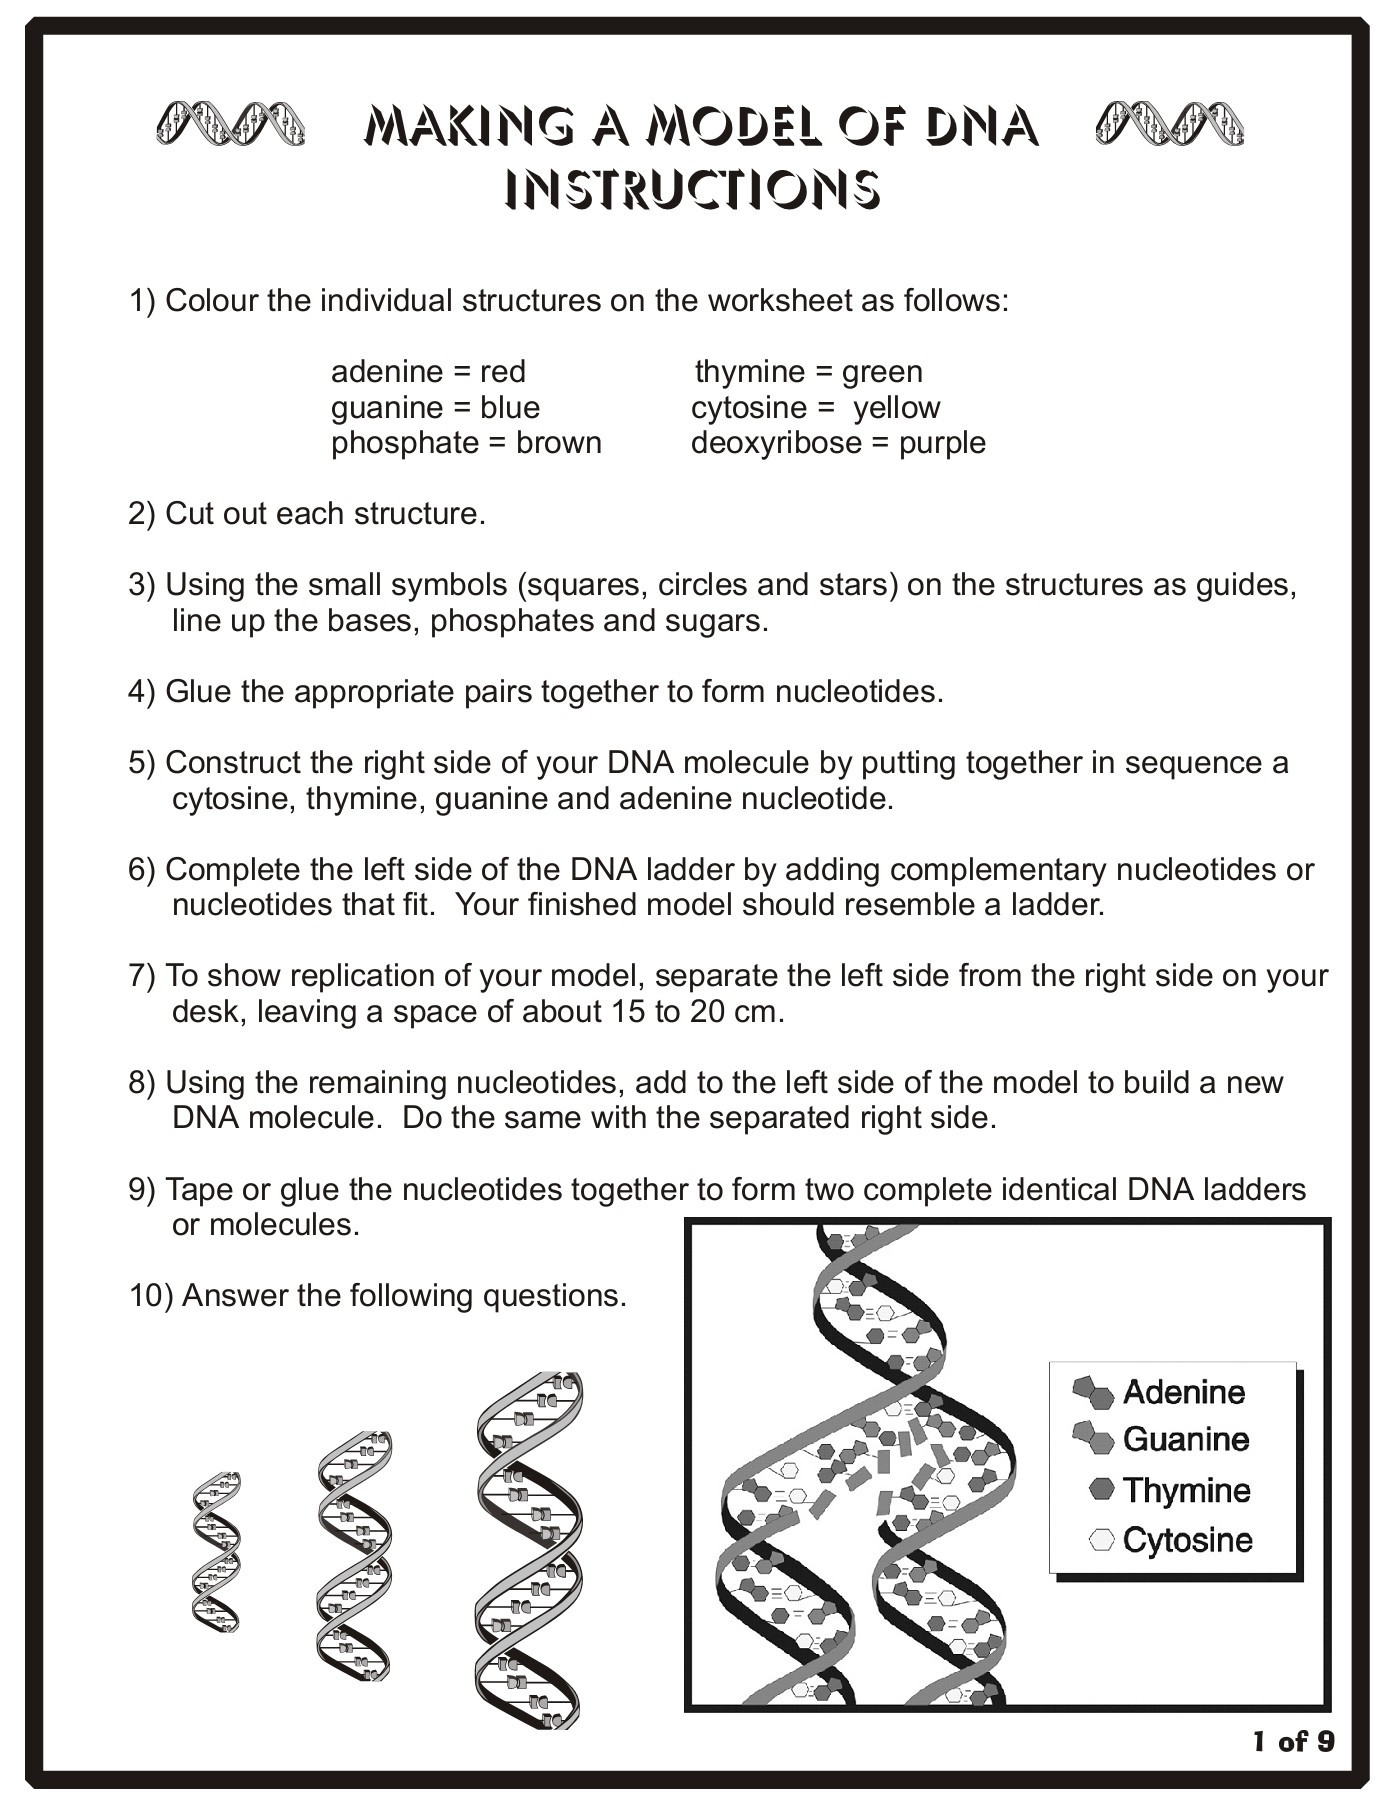 Dna and Replication Worksheet Making A Model Of Dna Instructions TriPod Pages 1 9